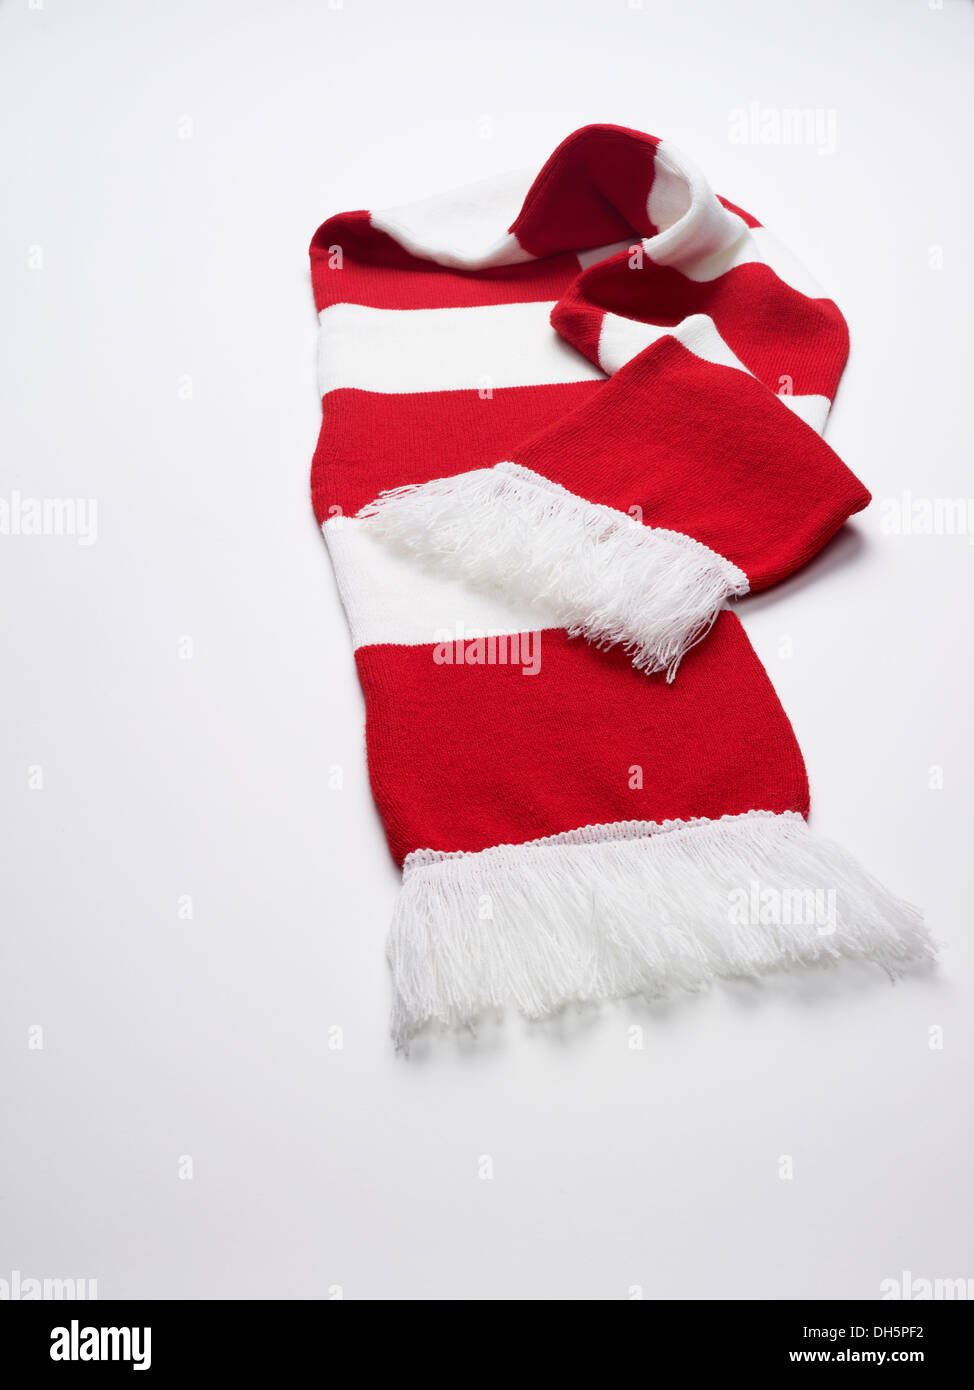 A red and white football scarf on a white background Stock Photo